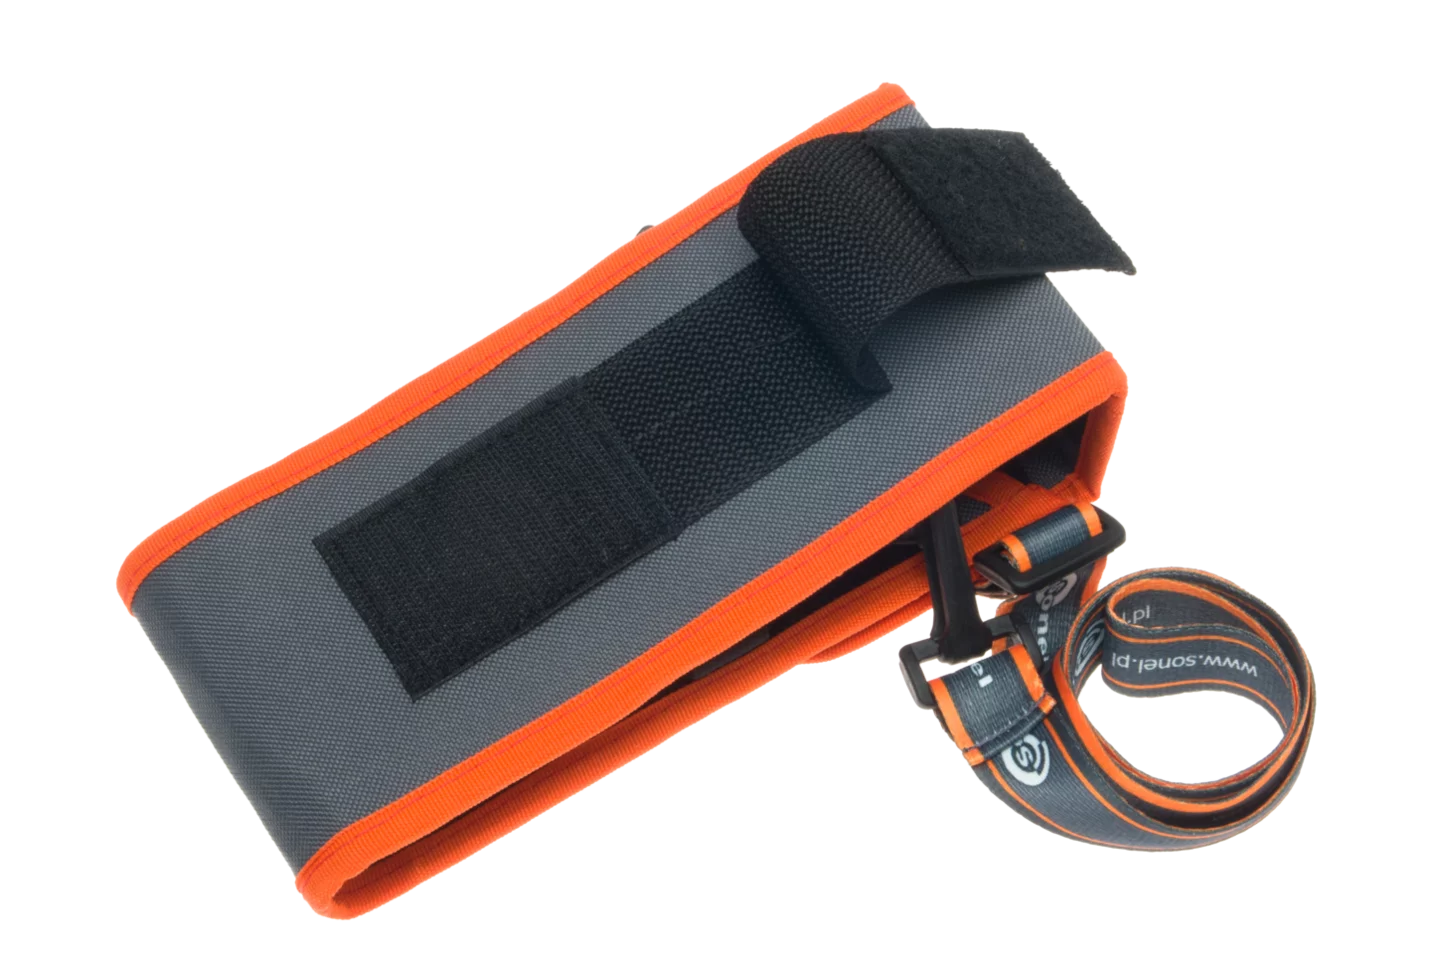 S-3  Carrying case